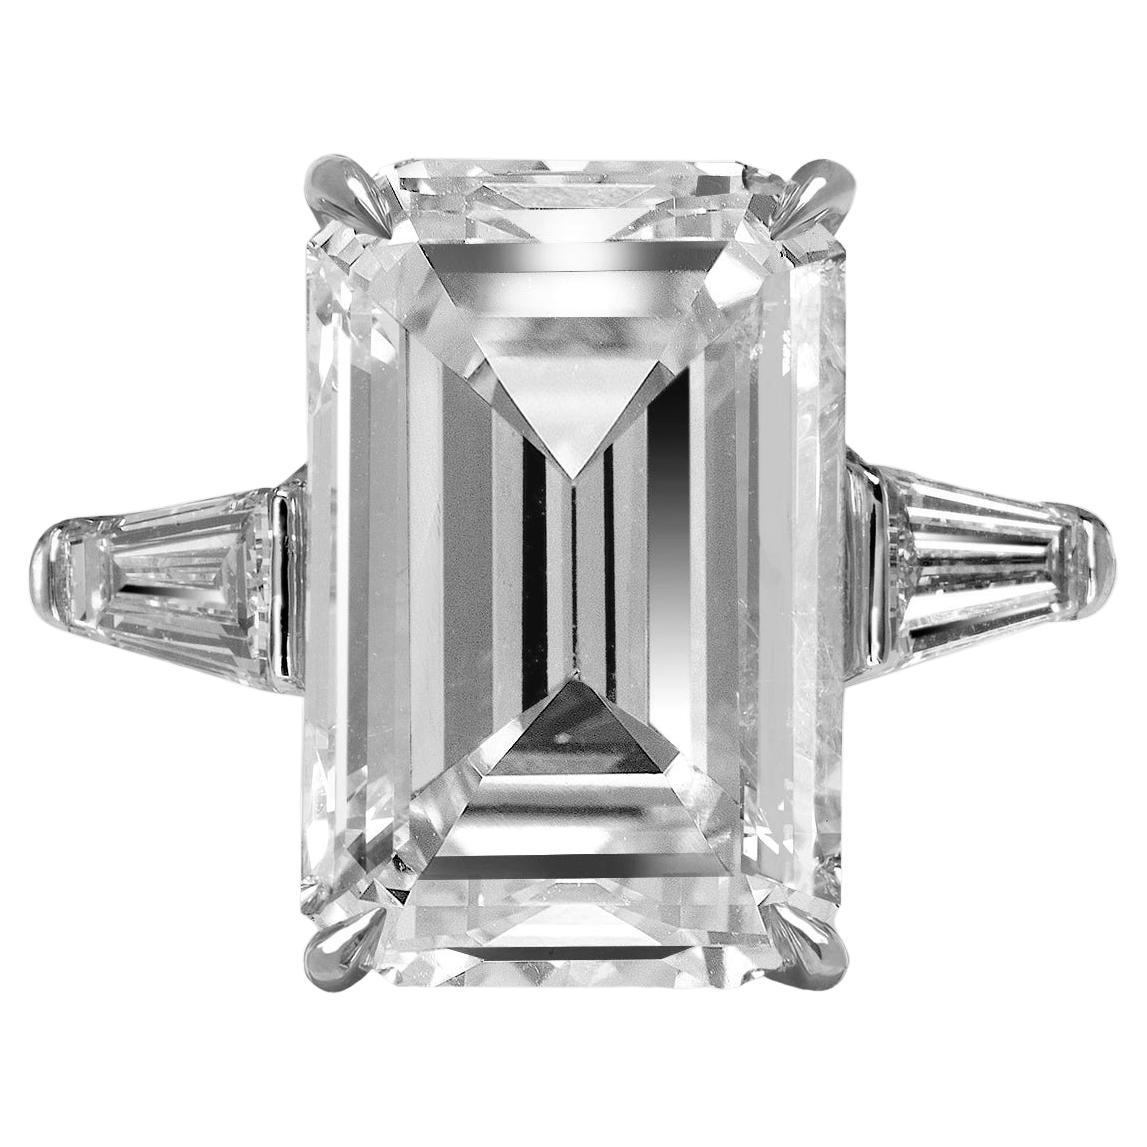 Exceptional GIA Certified 5 Carat Emerald Cut Diamond Ring